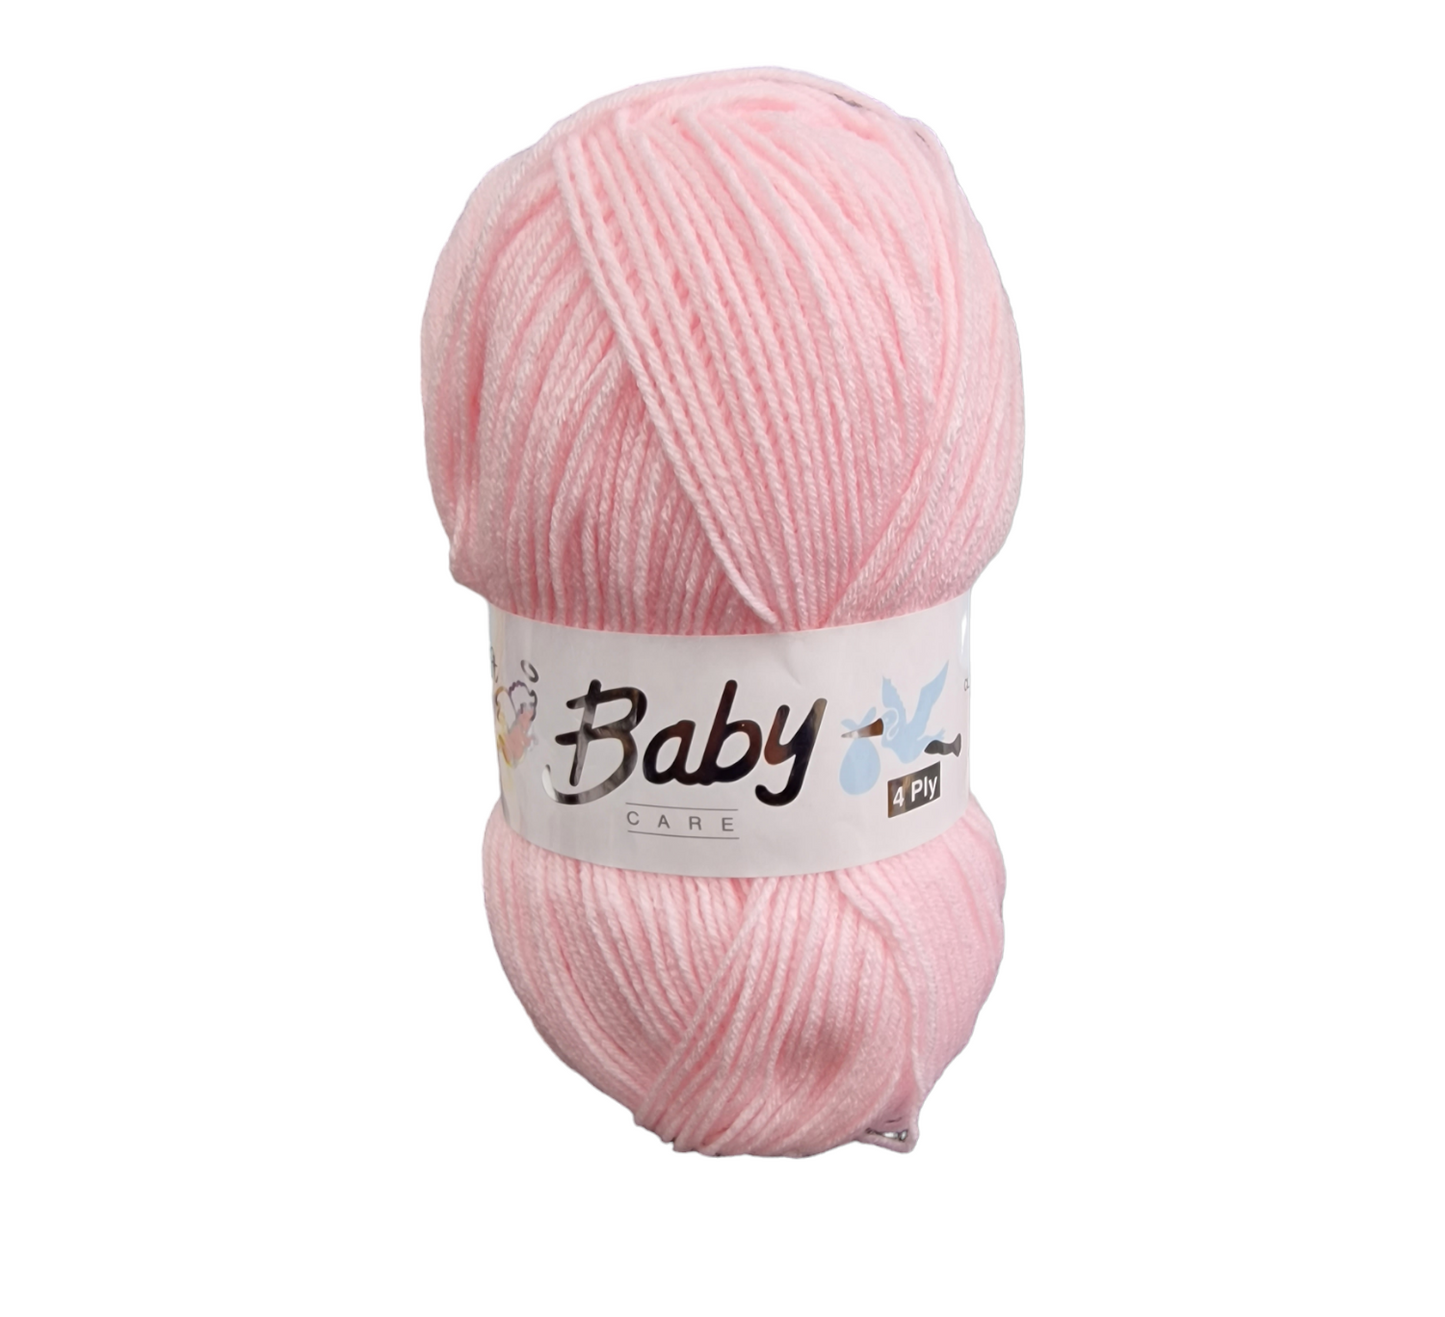 Baby Care 4 ply